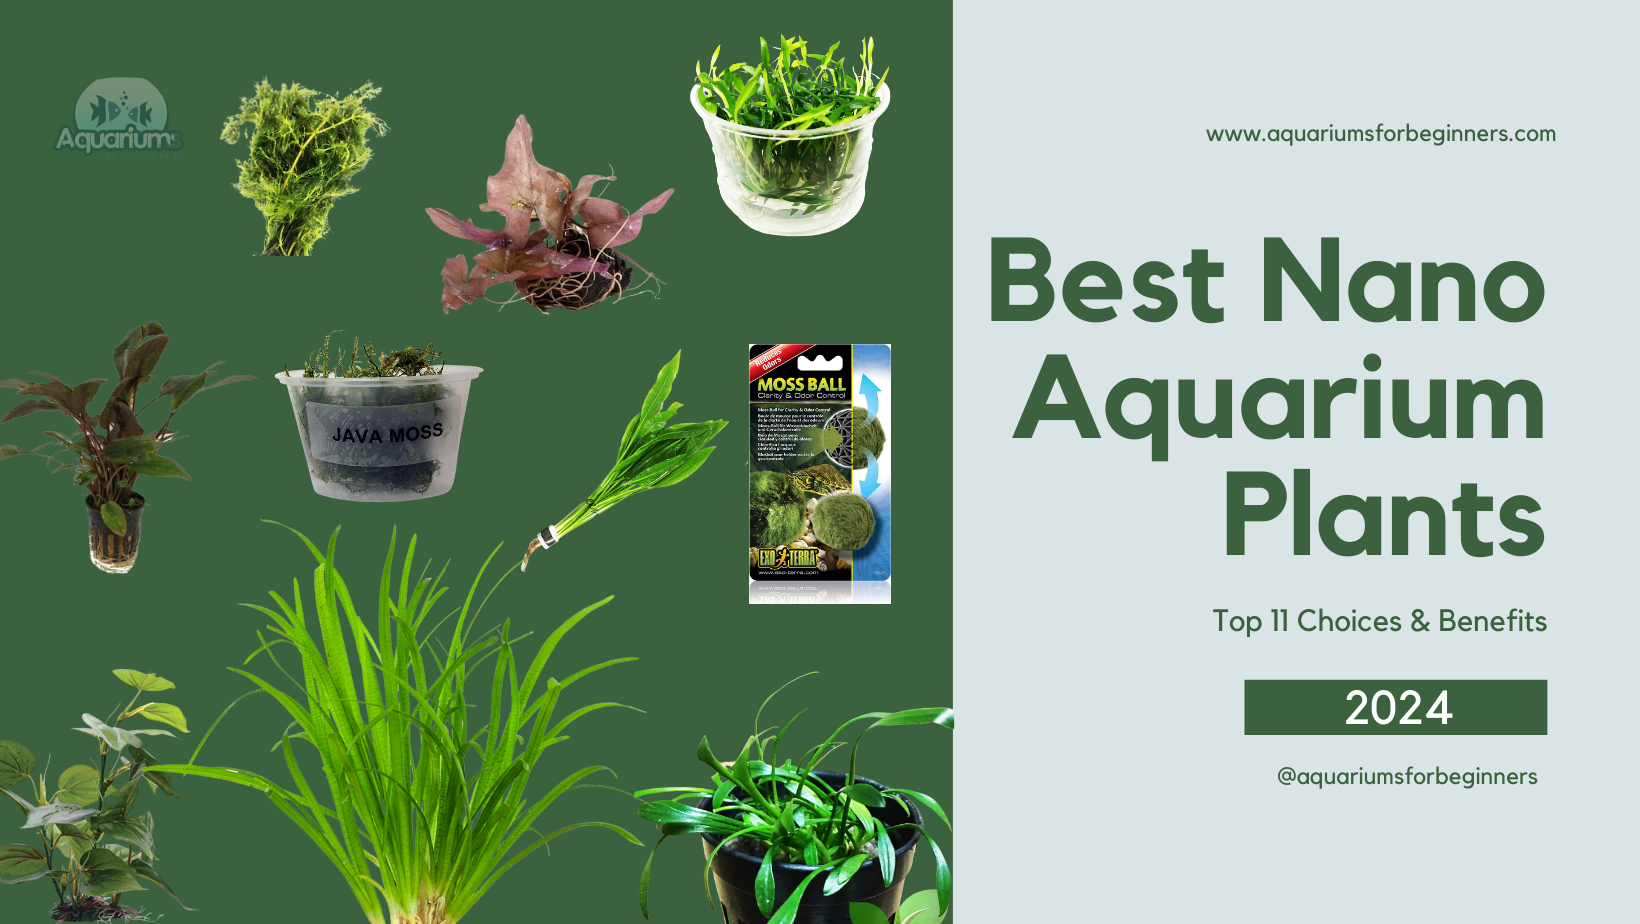 Bright and informative image displaying a collection of various "Best Nano Aquarium Plants" with labels and descriptions, set against a green background. The title and social media handle "@aquariumsforbeginners" are prominently featured, indicating educational content for aquarium enthusiasts.